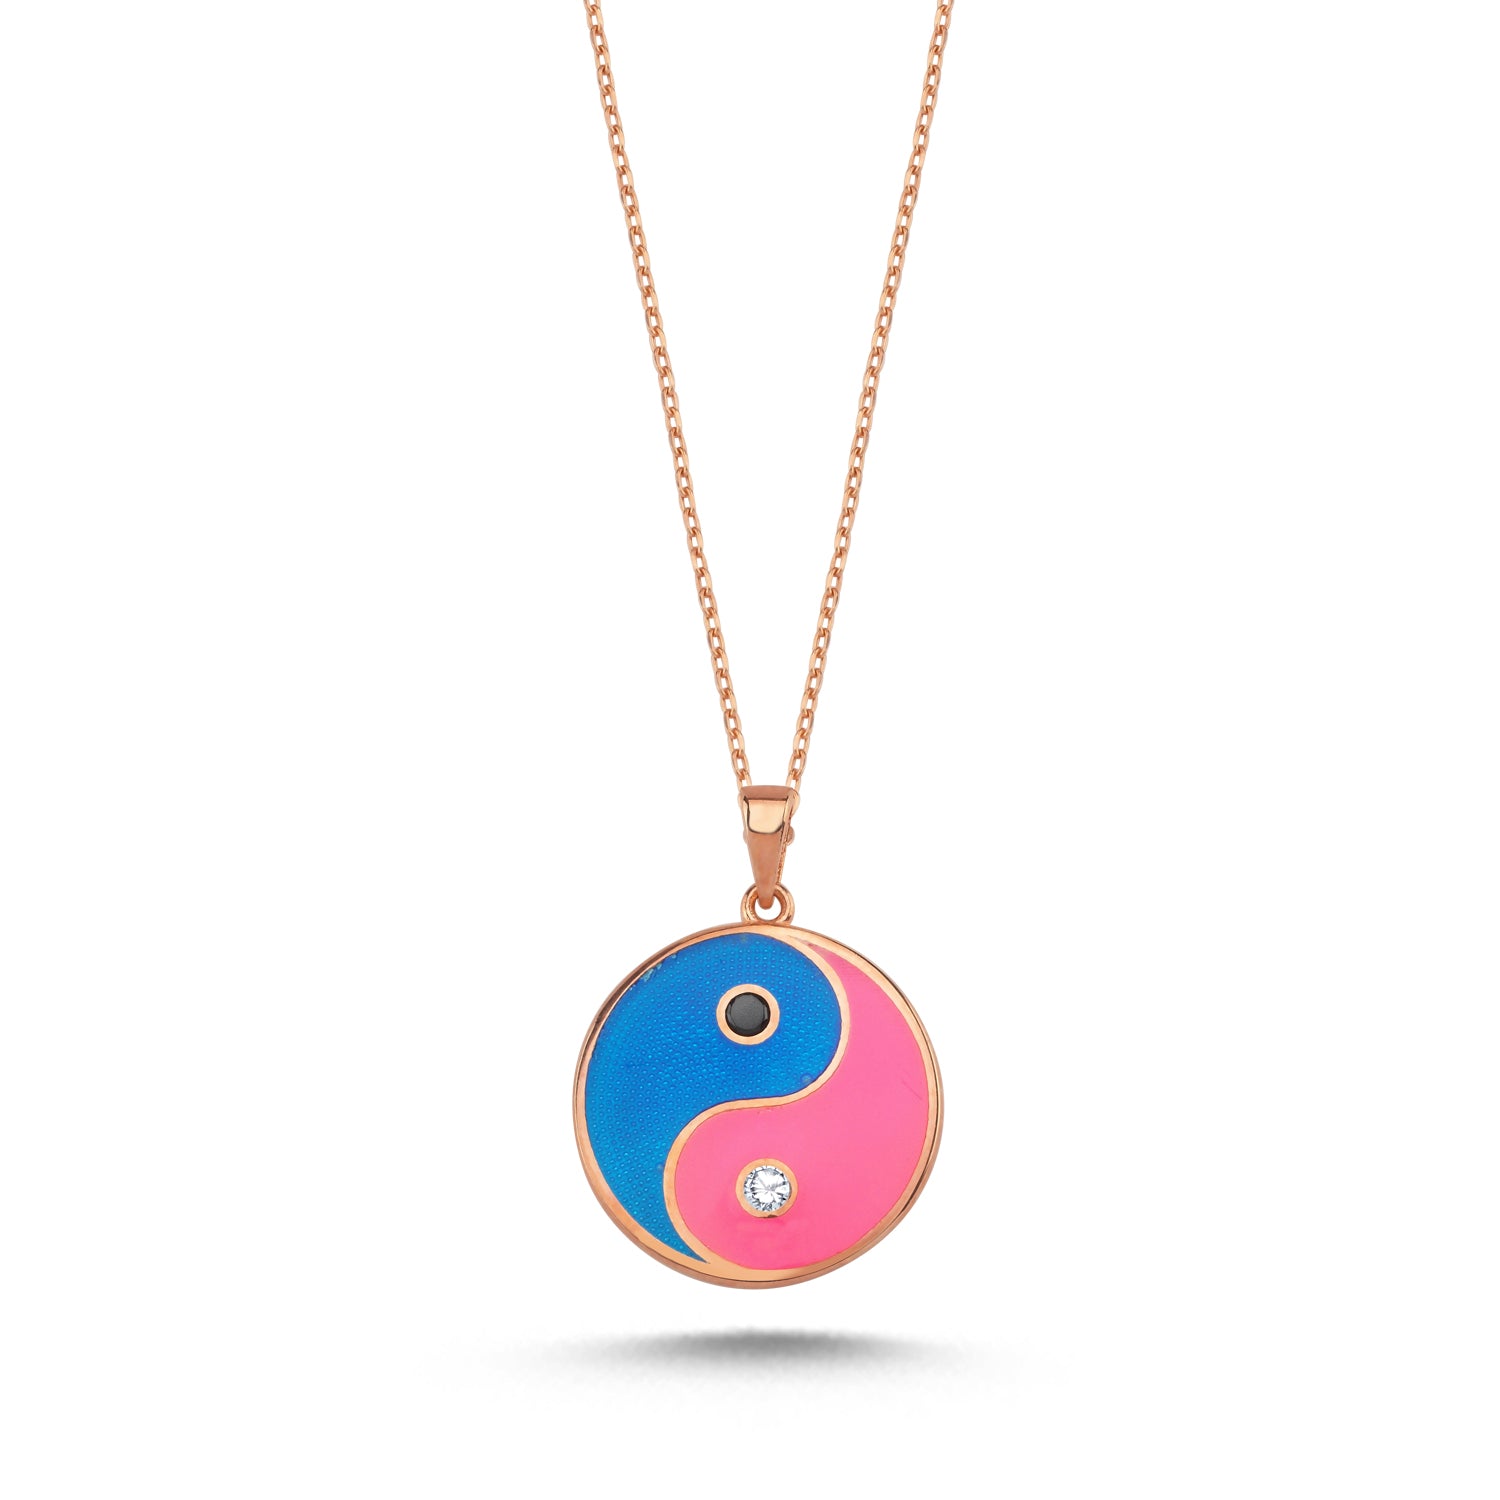 Paw Print Mood Color Changing Necklace | Shop necklaces, Mood colors, Paw  print